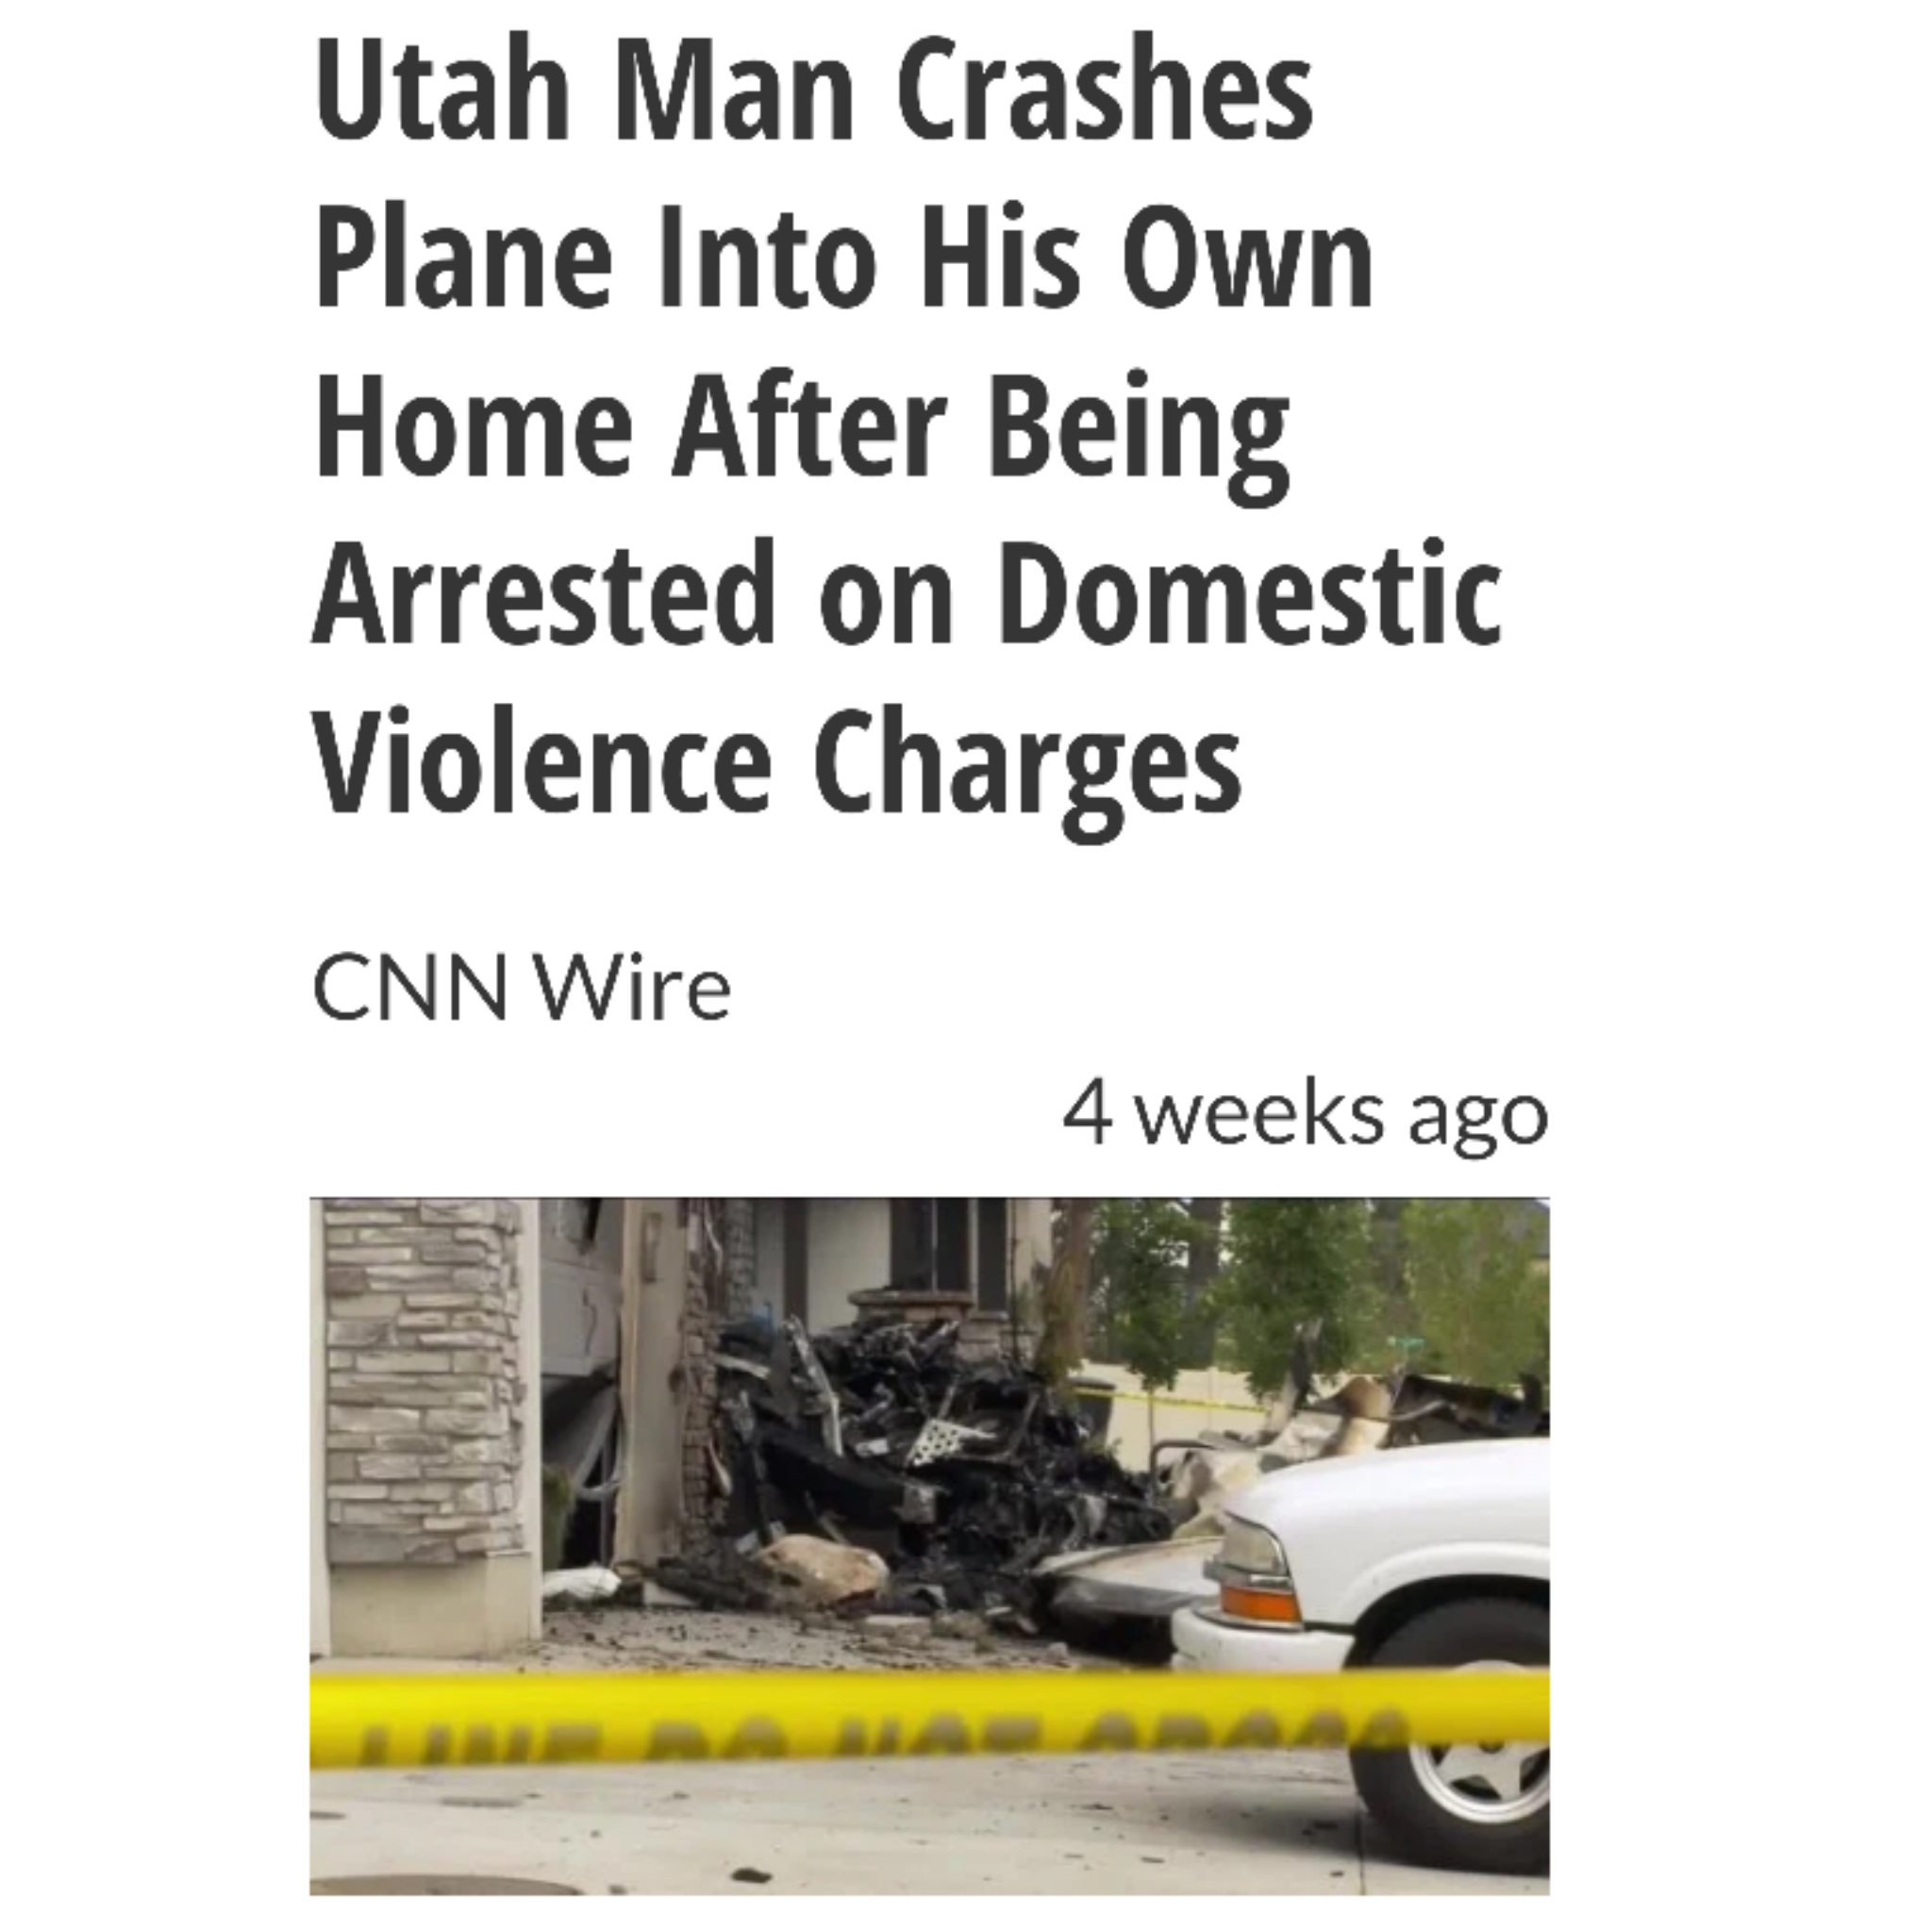 vehicle - Utah Man Crashes Plane Into His Own Home After Being Arrested on Domestic Violence Charges Cnn Wire 4 weeks ago